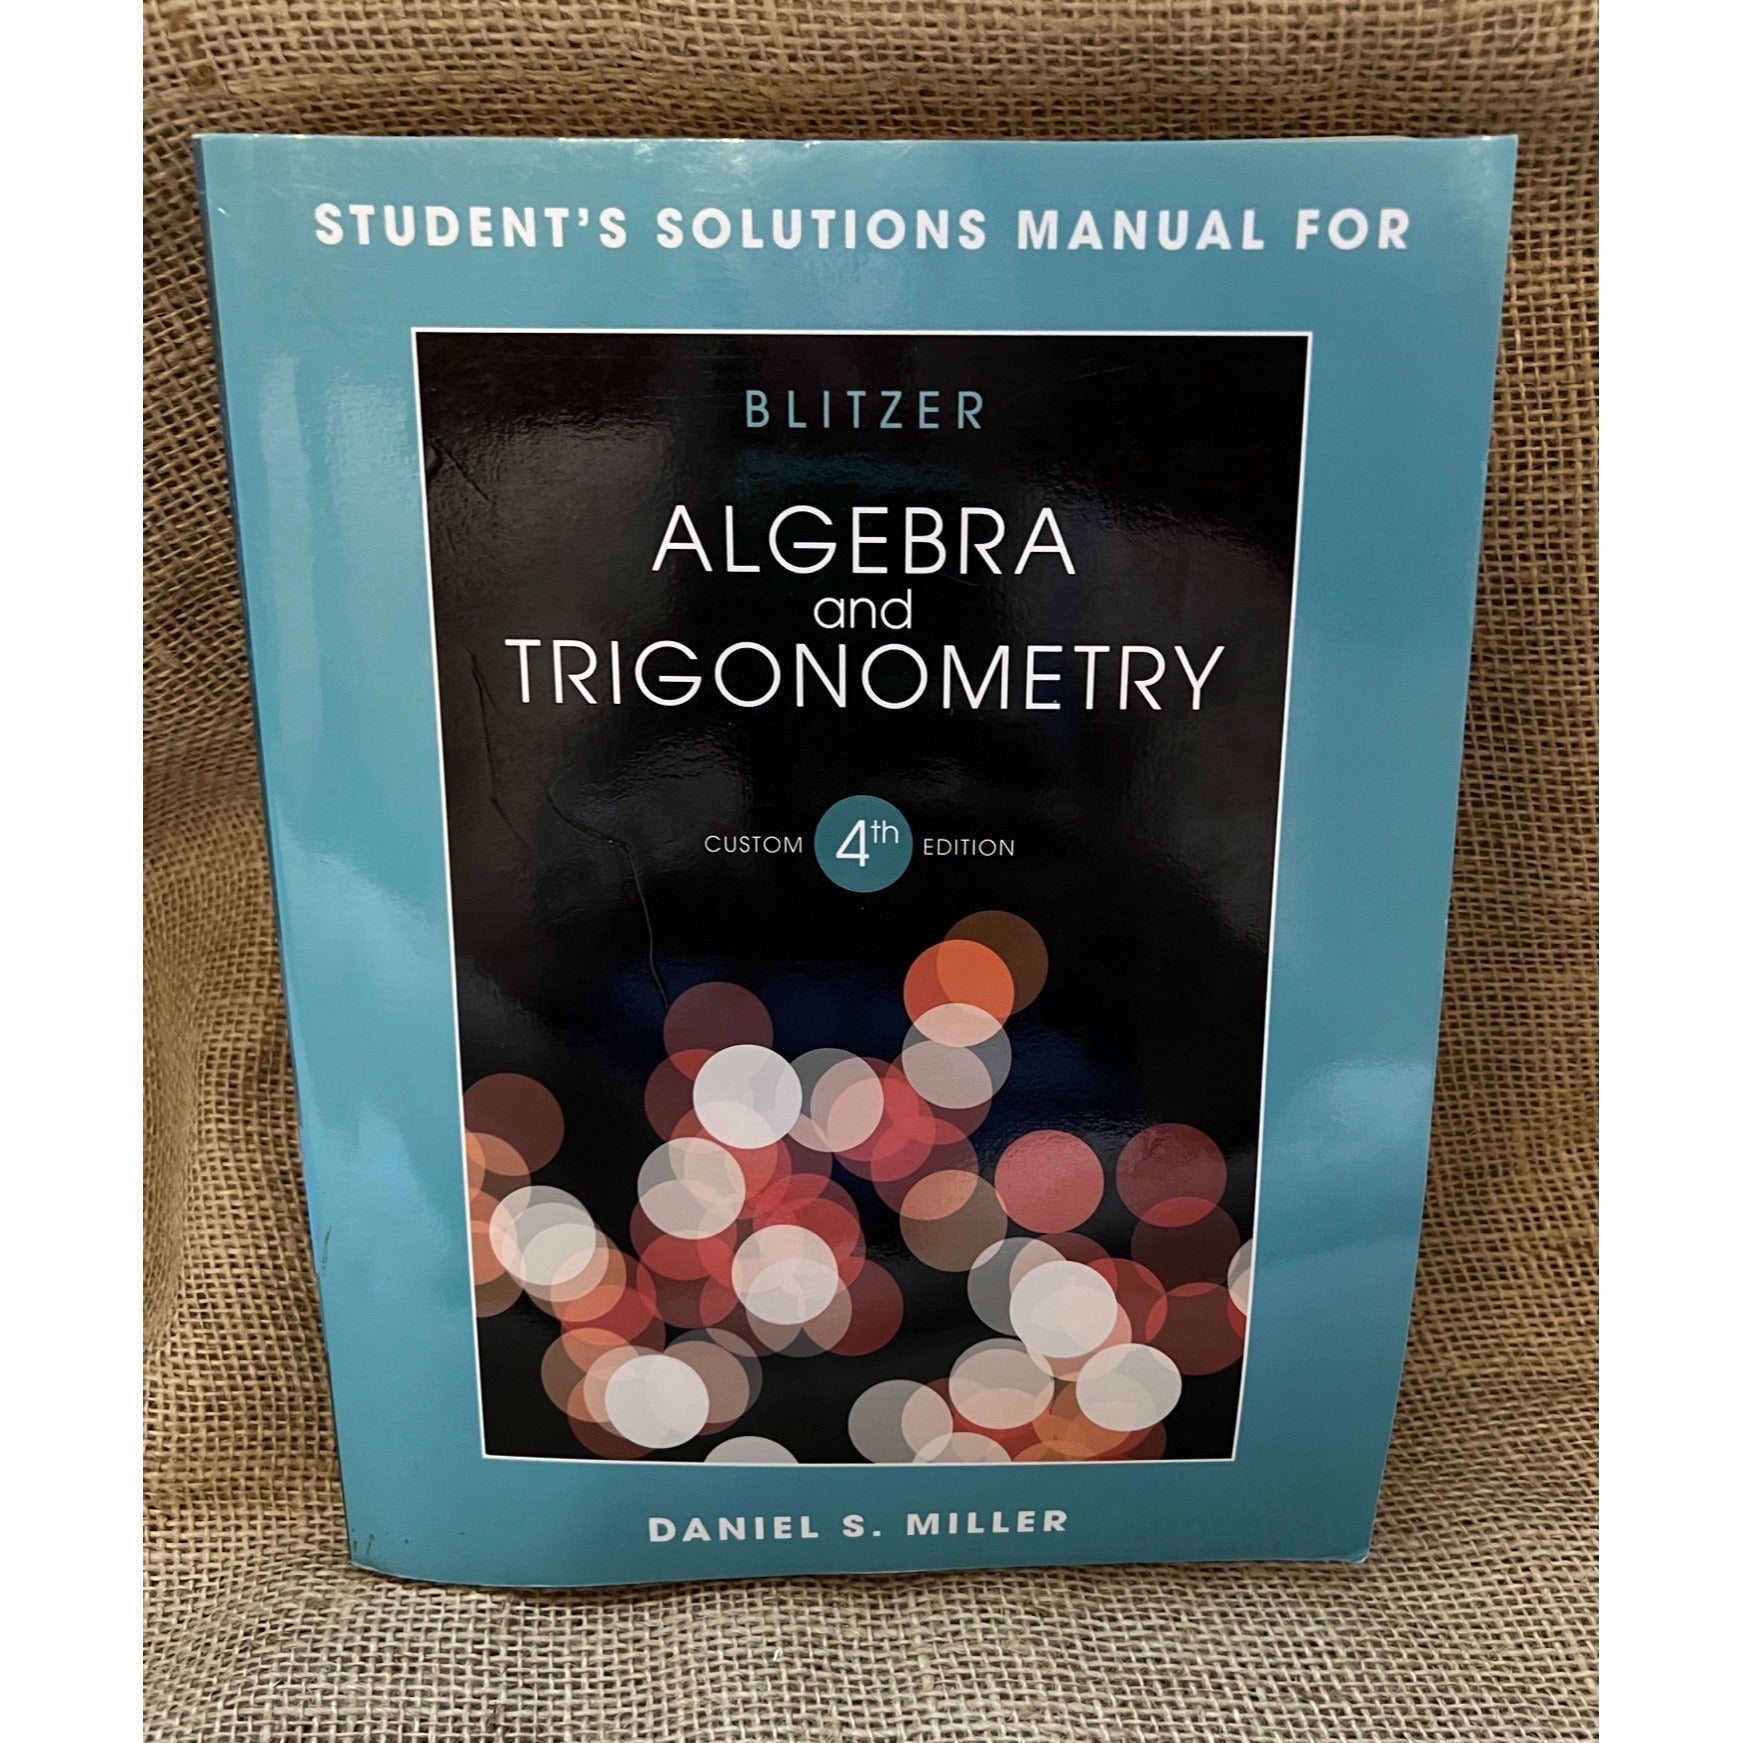 Student's Solutions Manual for Blitzer Algebra and Trigonometry, 4th Edition by Daniel S. MIller, Paperback